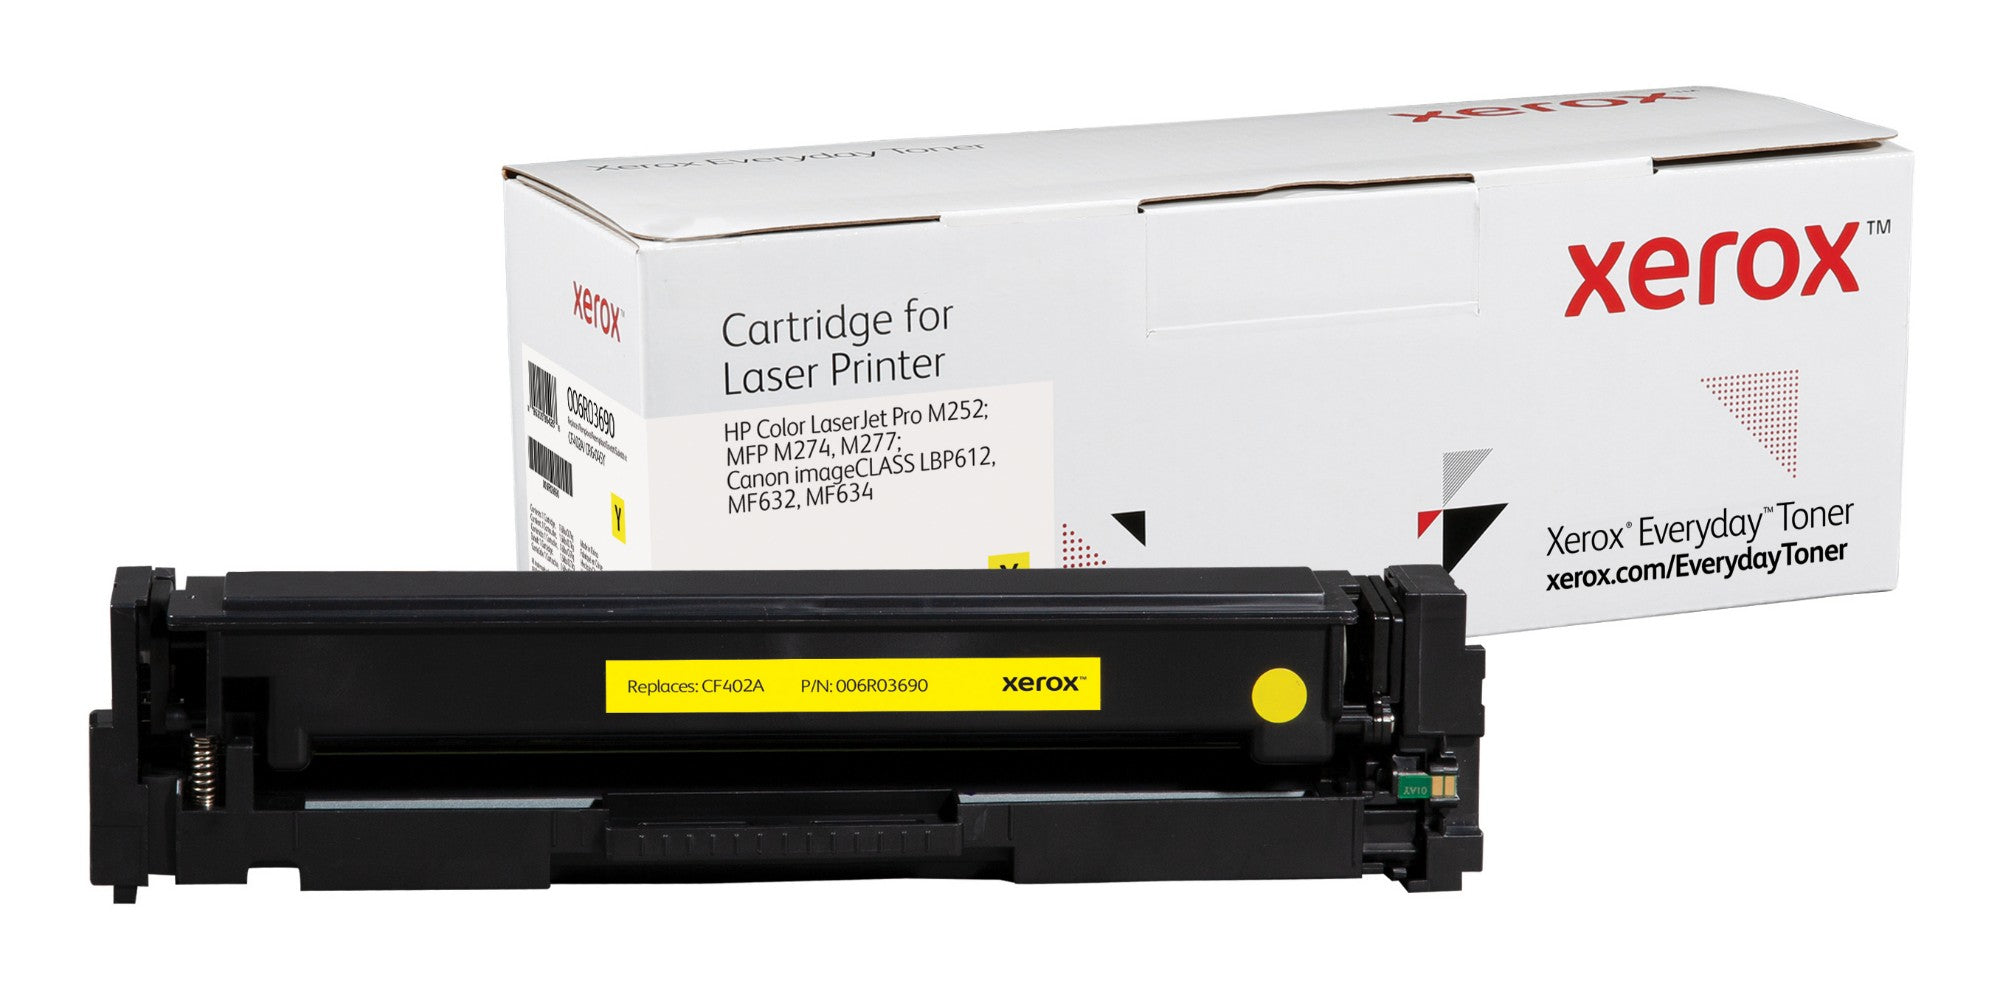 Xerox 006R03690 Toner cartridge yellow, 1.4K pages (replaces Canon 045 HP 201A/CF402A) for Canon LBP-611/HP Pro M 252